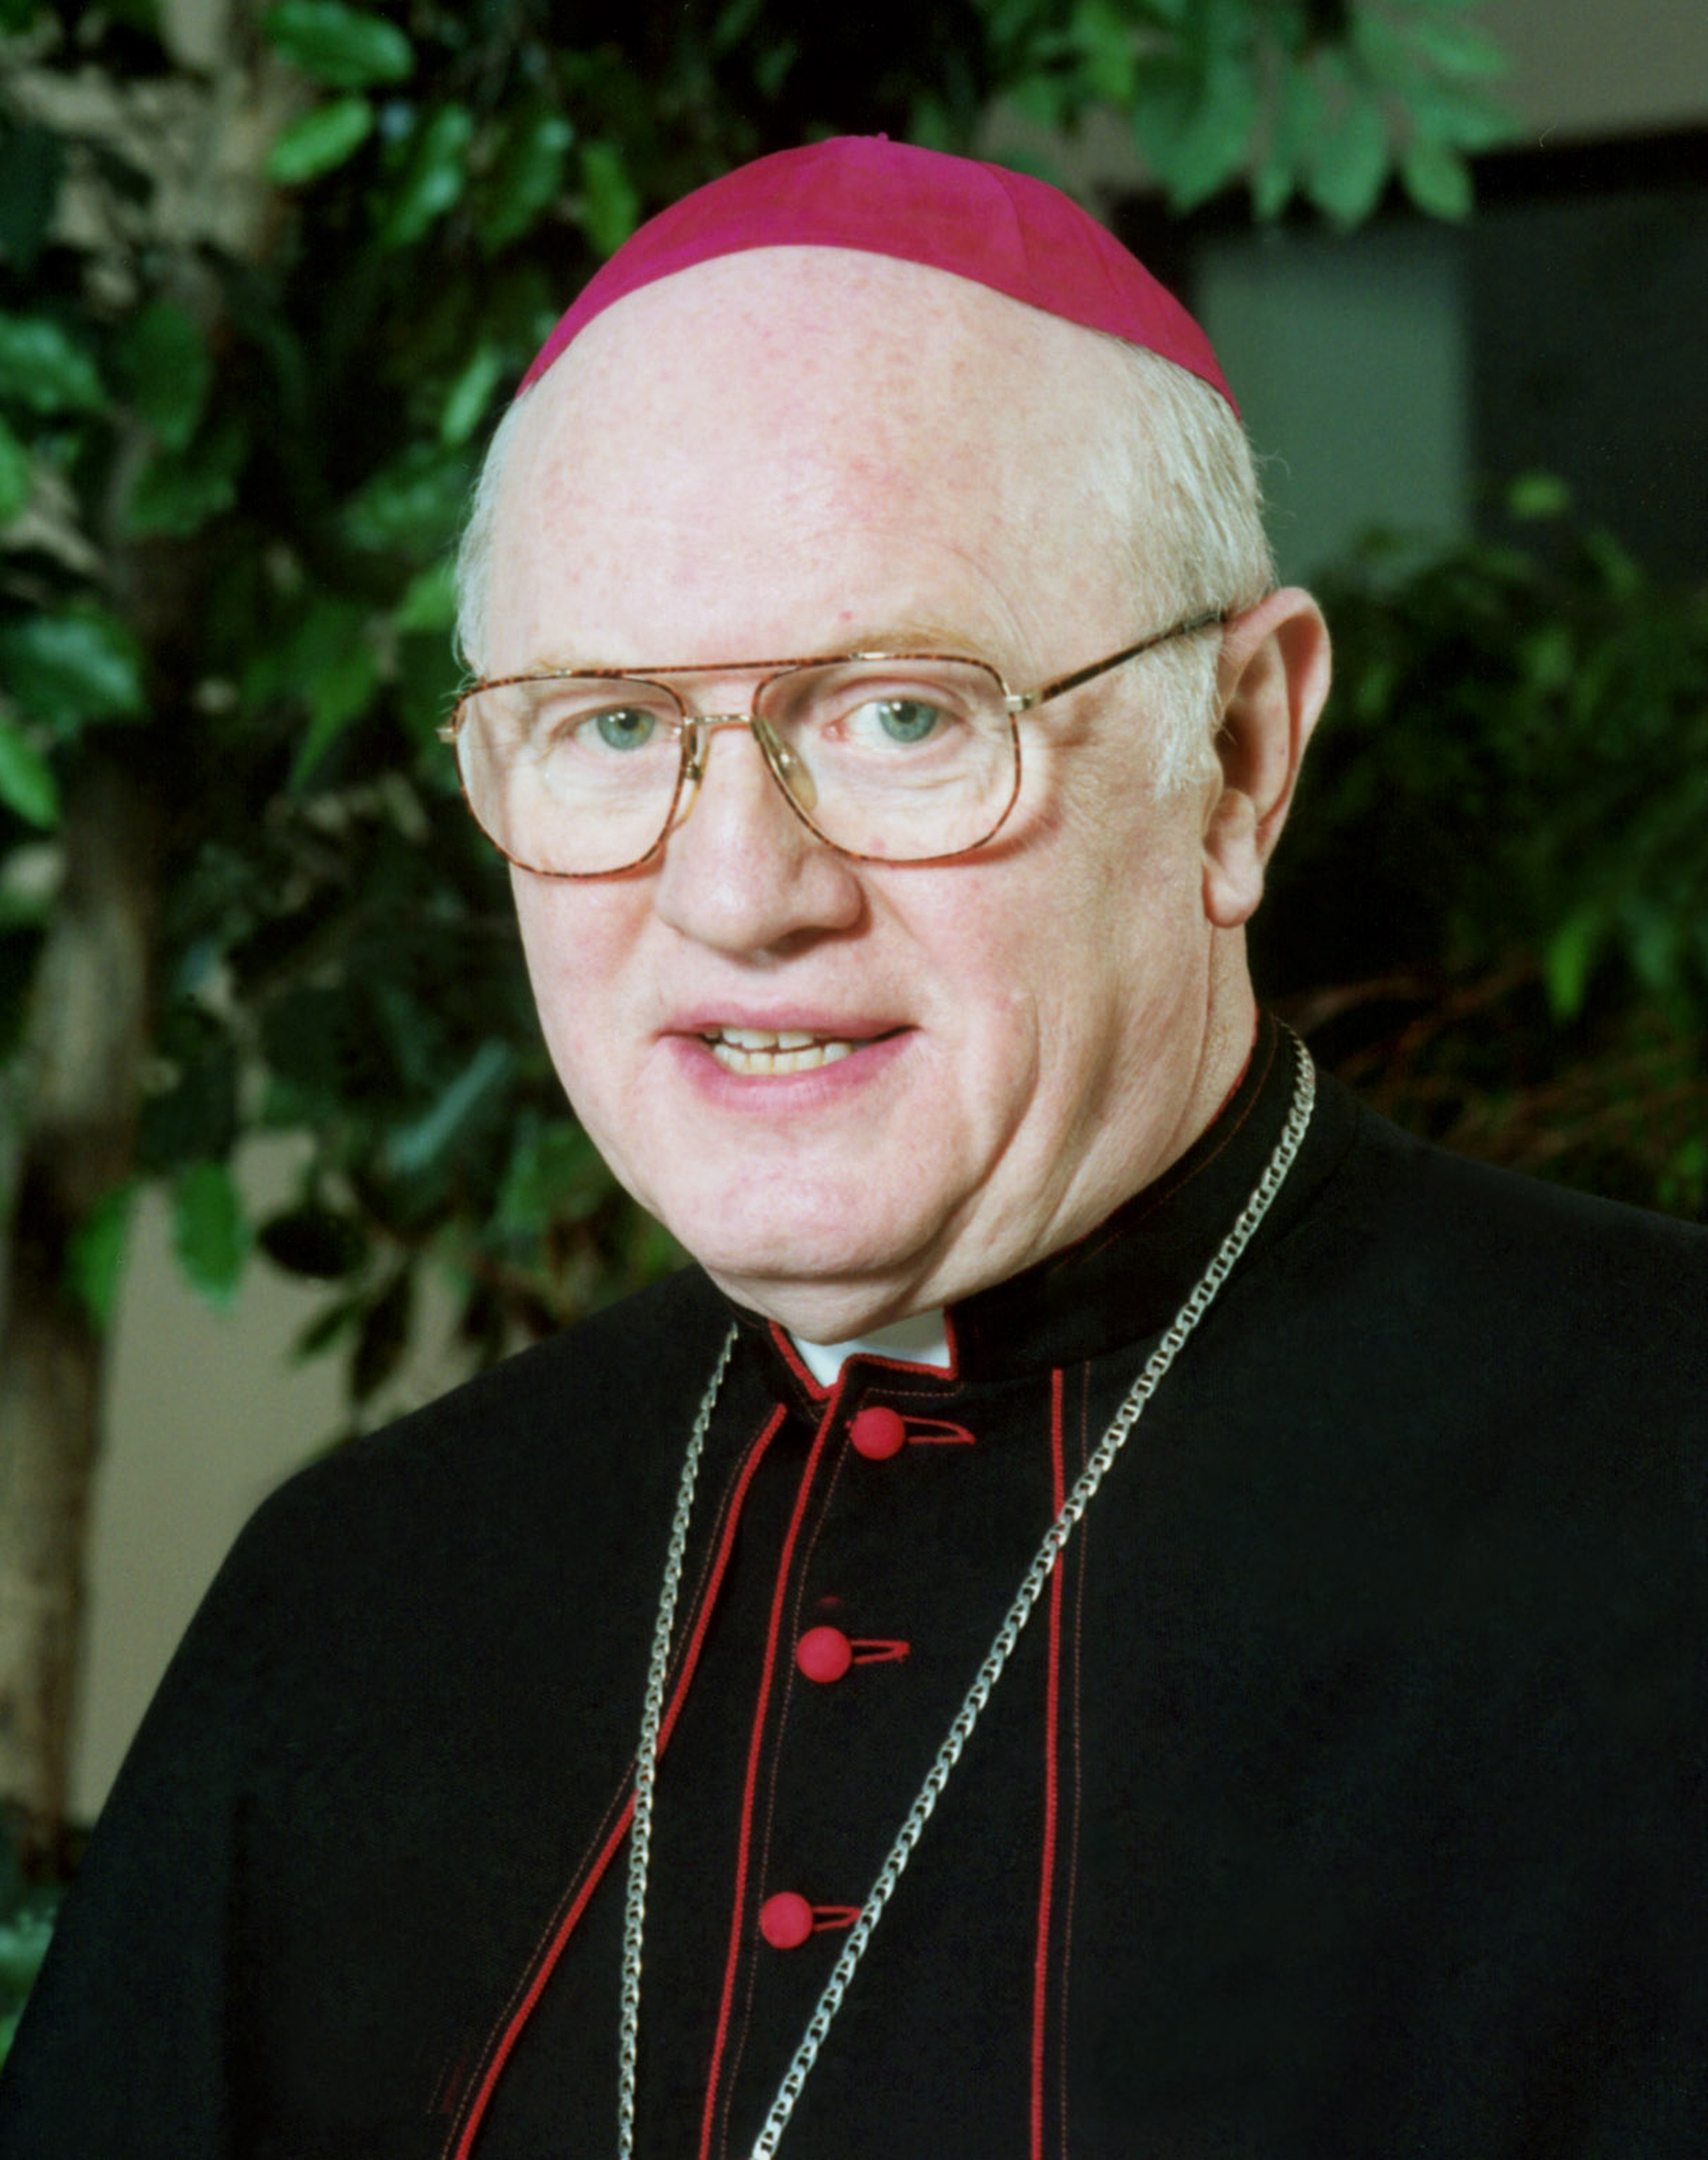 Retired Bishop Raymond J. Boland of Kansas City-St. Joseph, Mo., died in Cork, Ireland, Feb. 27 at at age 82. He was the fifth bishop of the Missouri diocese until he retired May 24, 2005. He is pictured in an undated photo. (CNS file photo) (Feb. 28, 2014) 